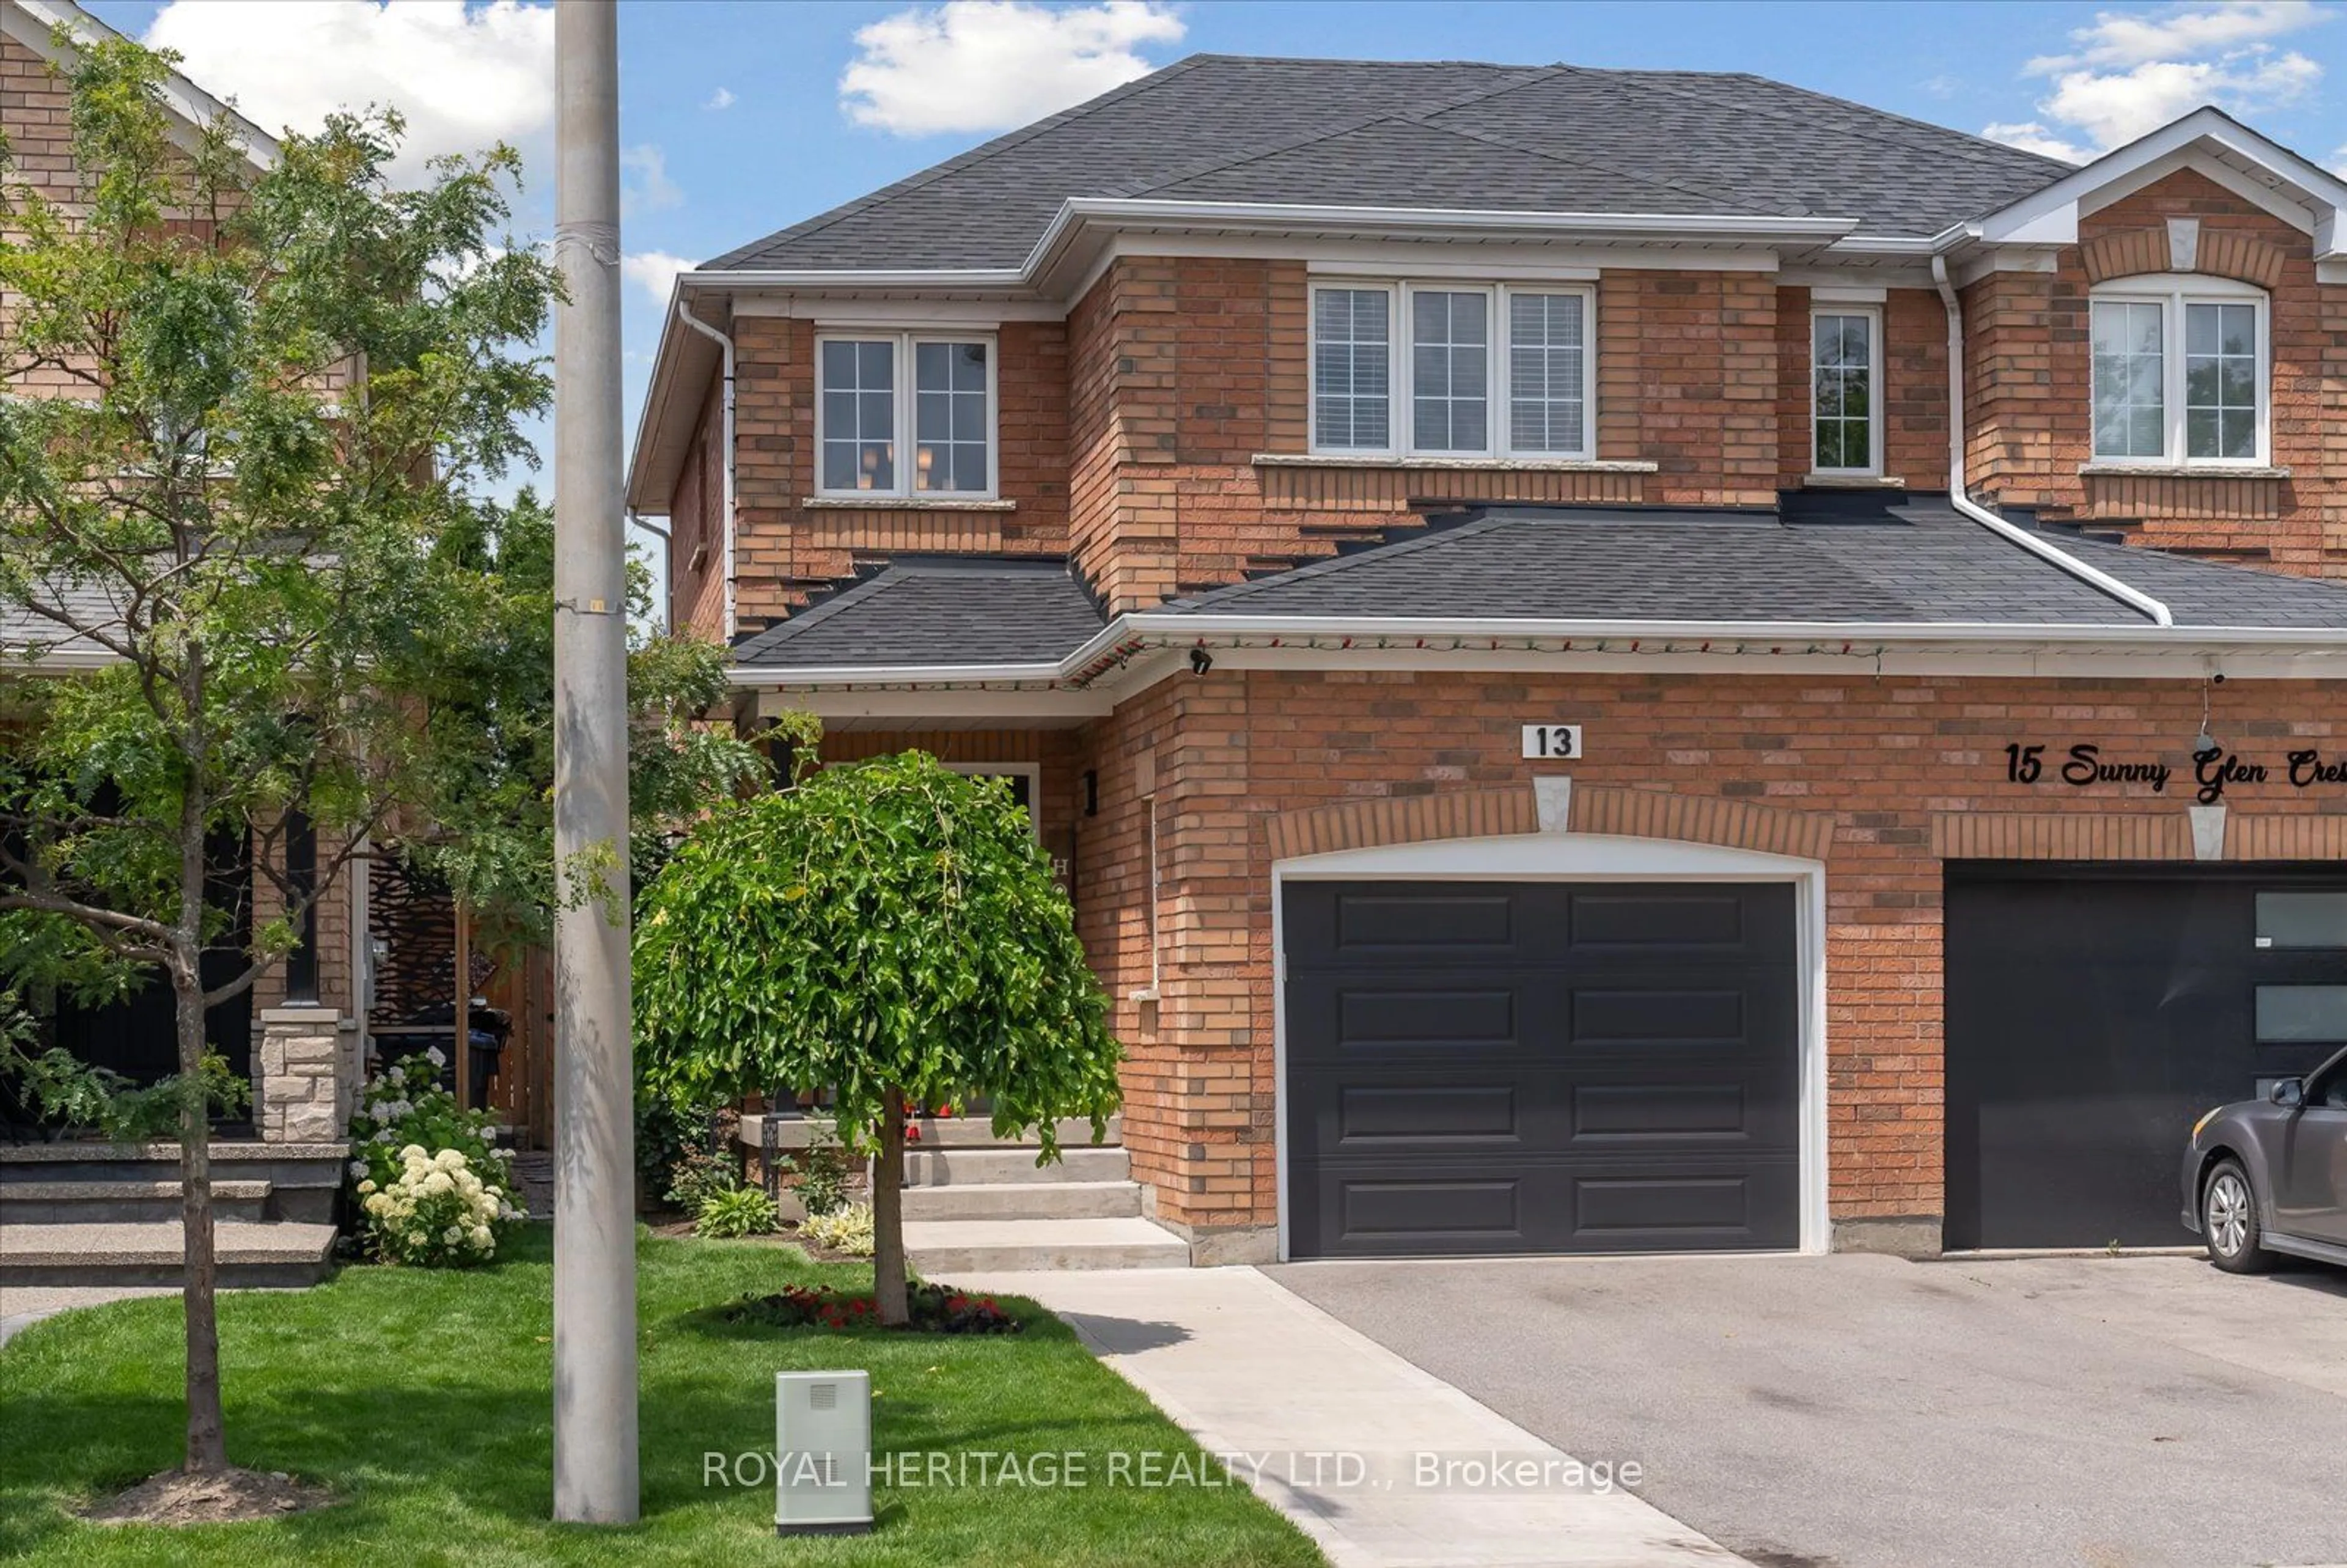 Home with brick exterior material for 13 Sunny Glen Cres, Brampton Ontario L7A 1N5